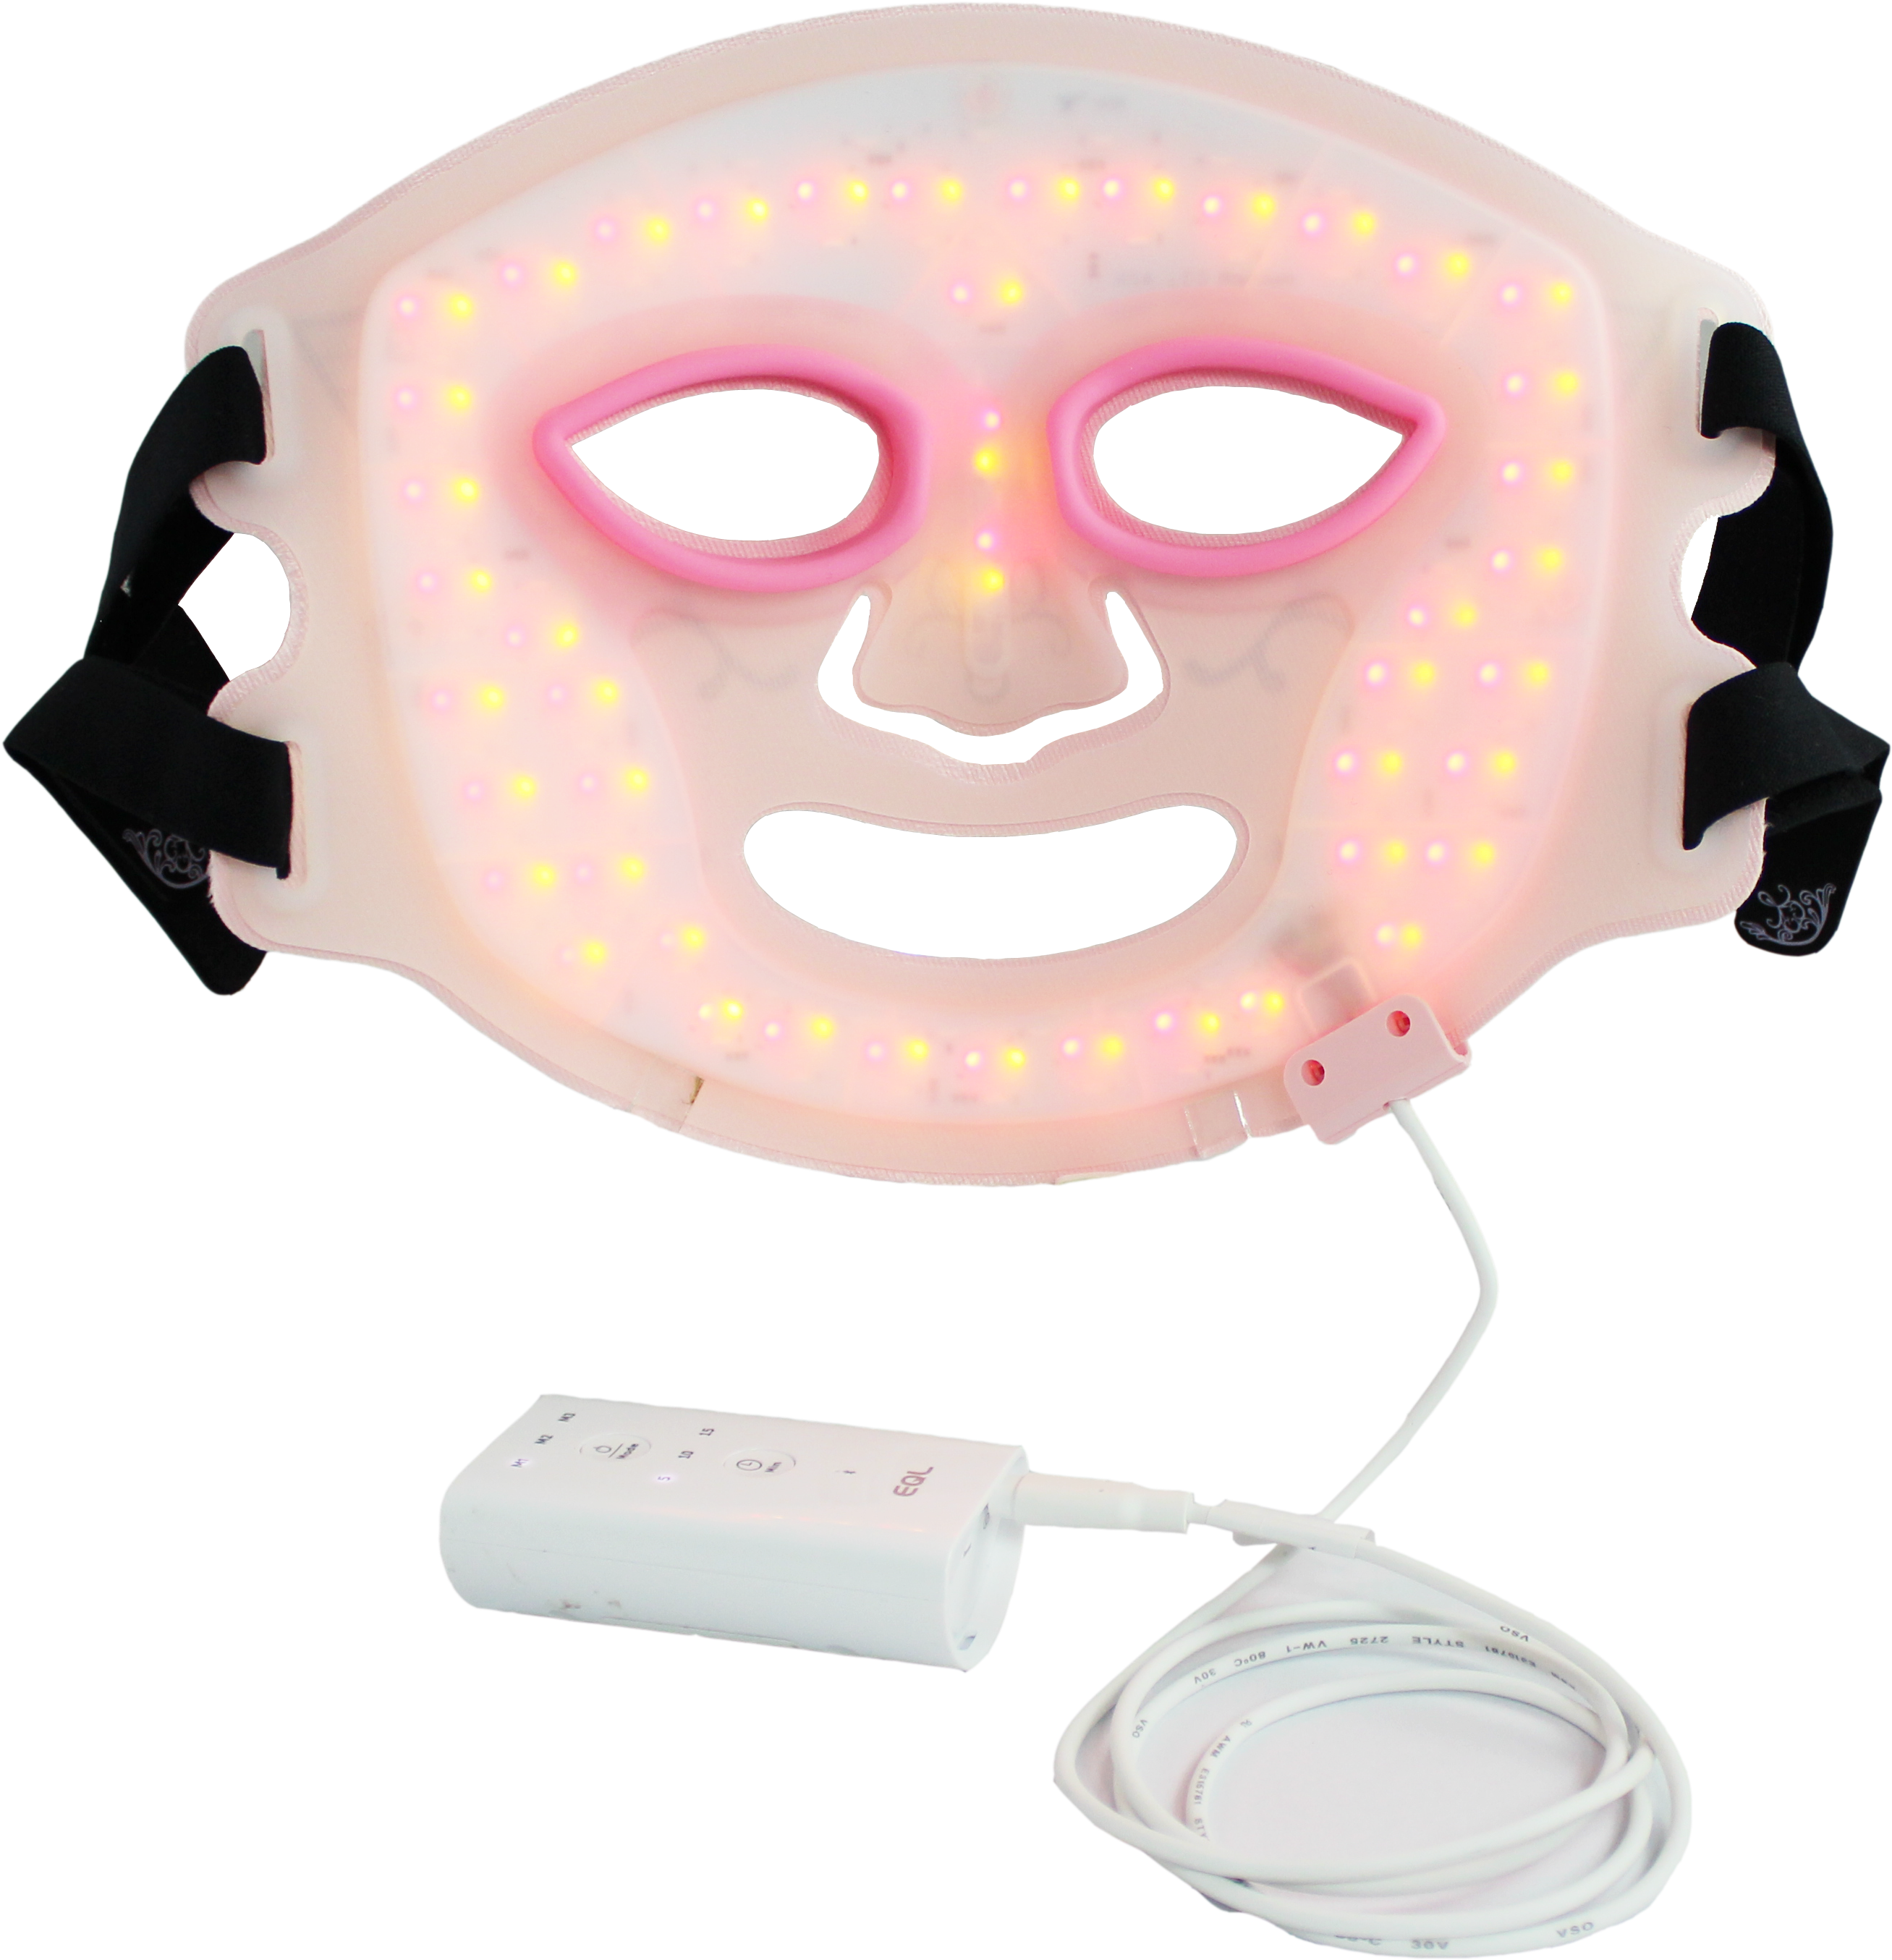 Eql Auro Light Color Therapy Beauty Face Mask For Anti-aging - Sleep Mask (2717x2874)